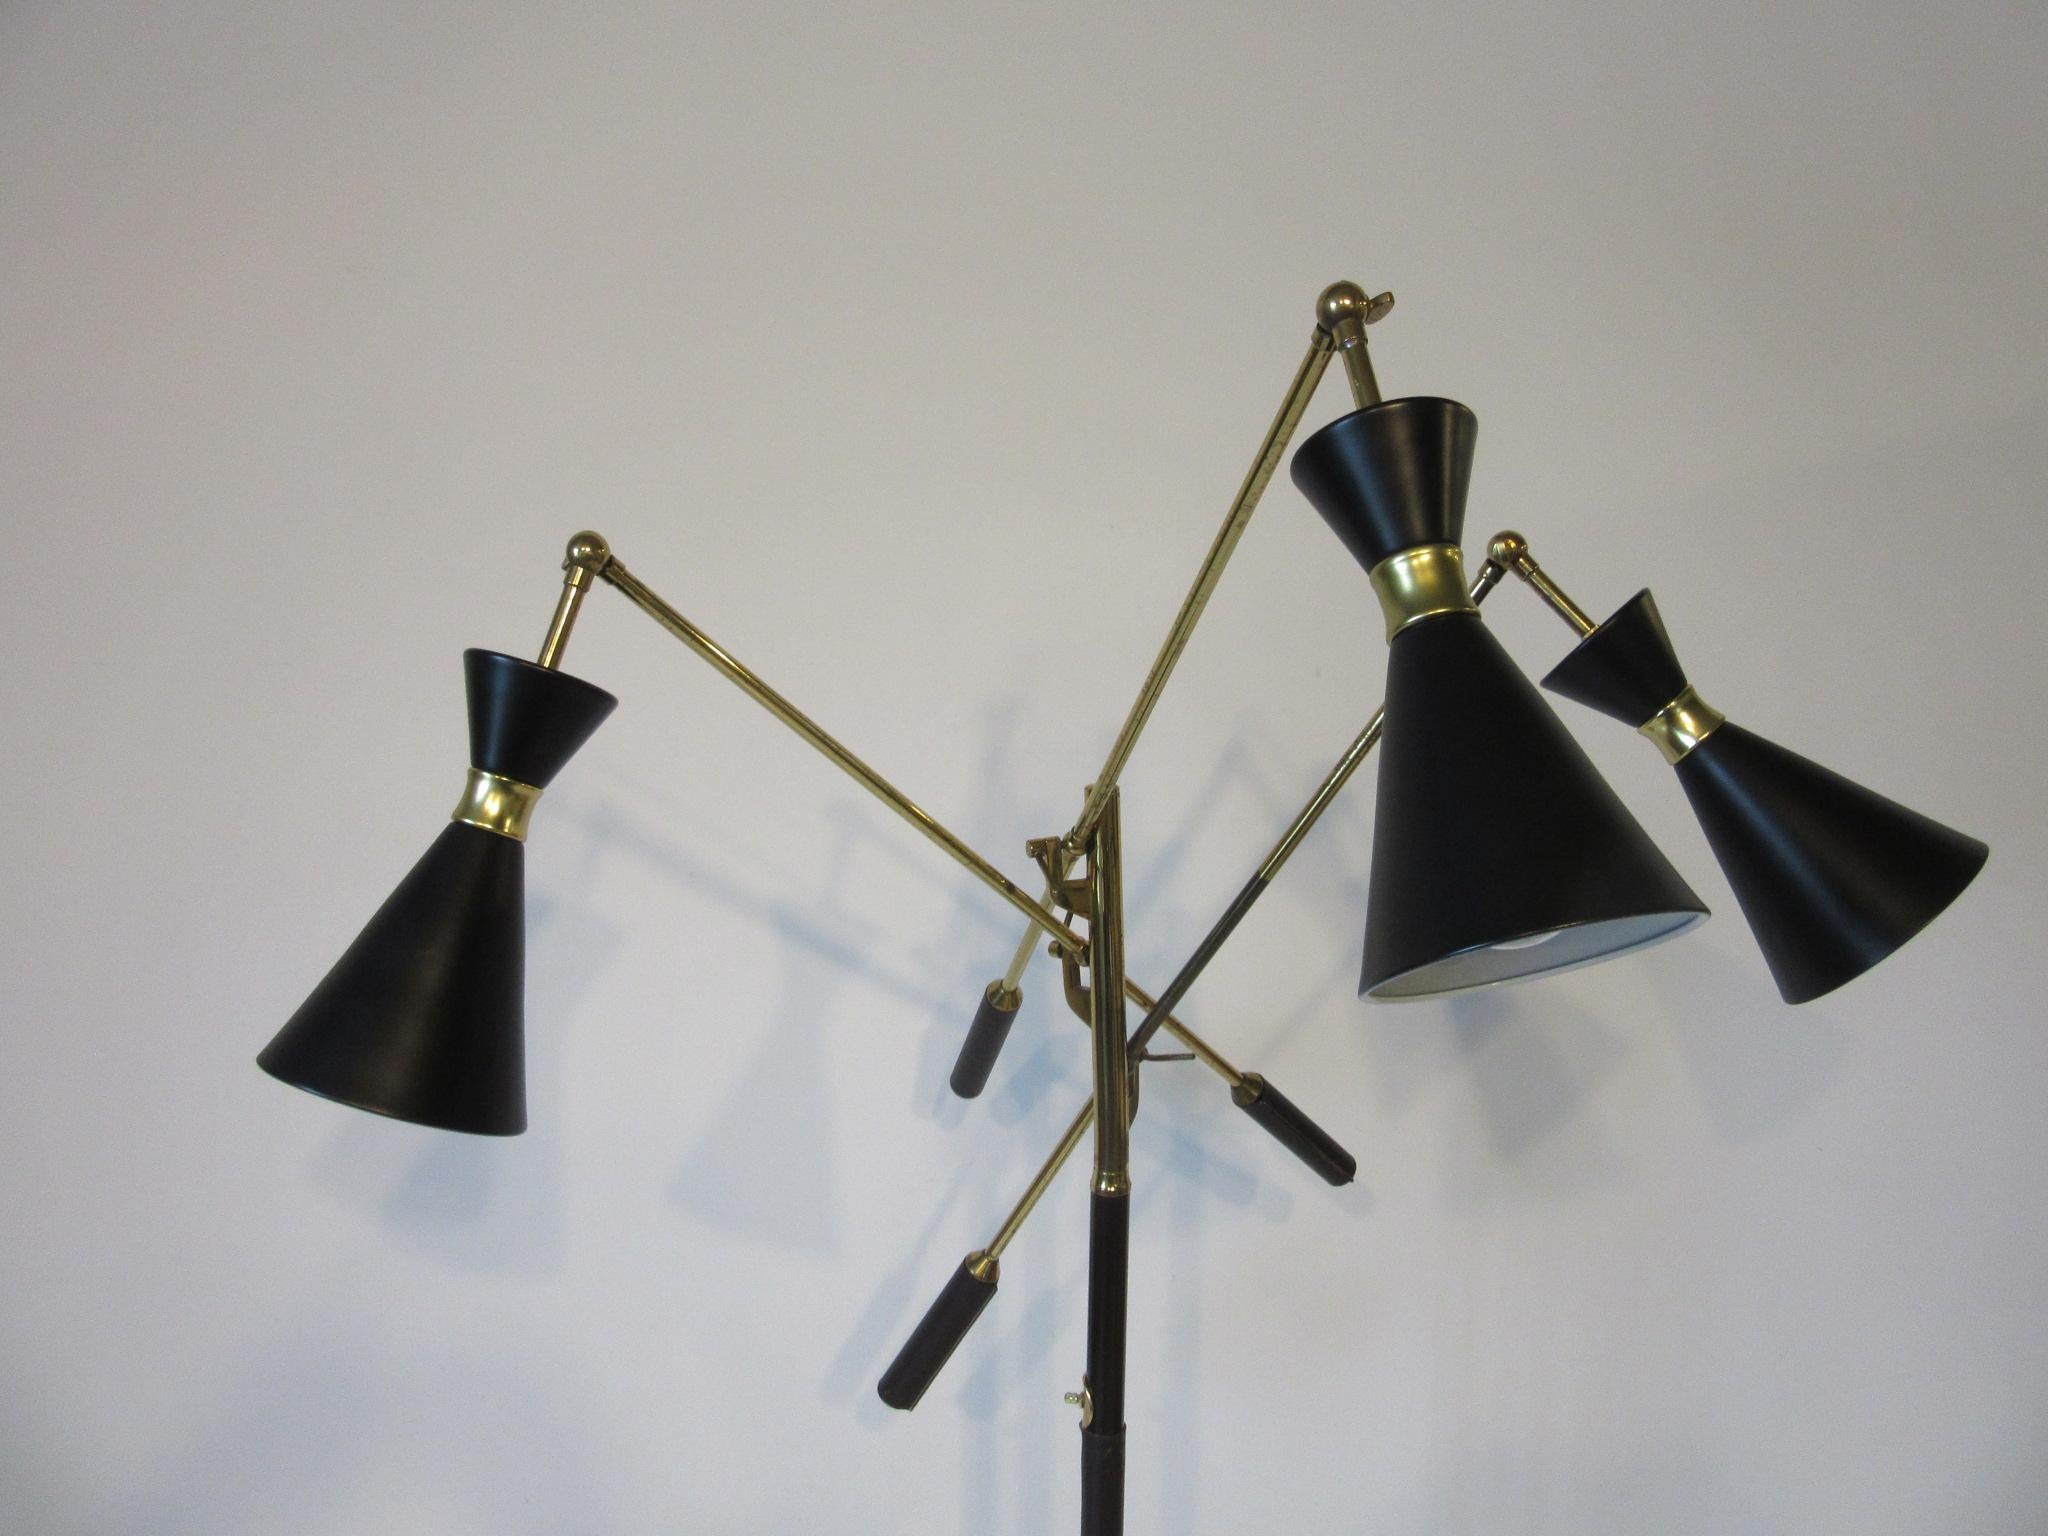 An adjustable arm floor lamp with brass and black metal shades, brass arms and accents and a gray black Carrara marble base. Brass on and off switch on the pole which is a very dark brown complementing the dark brown leather handles. The lamp has a